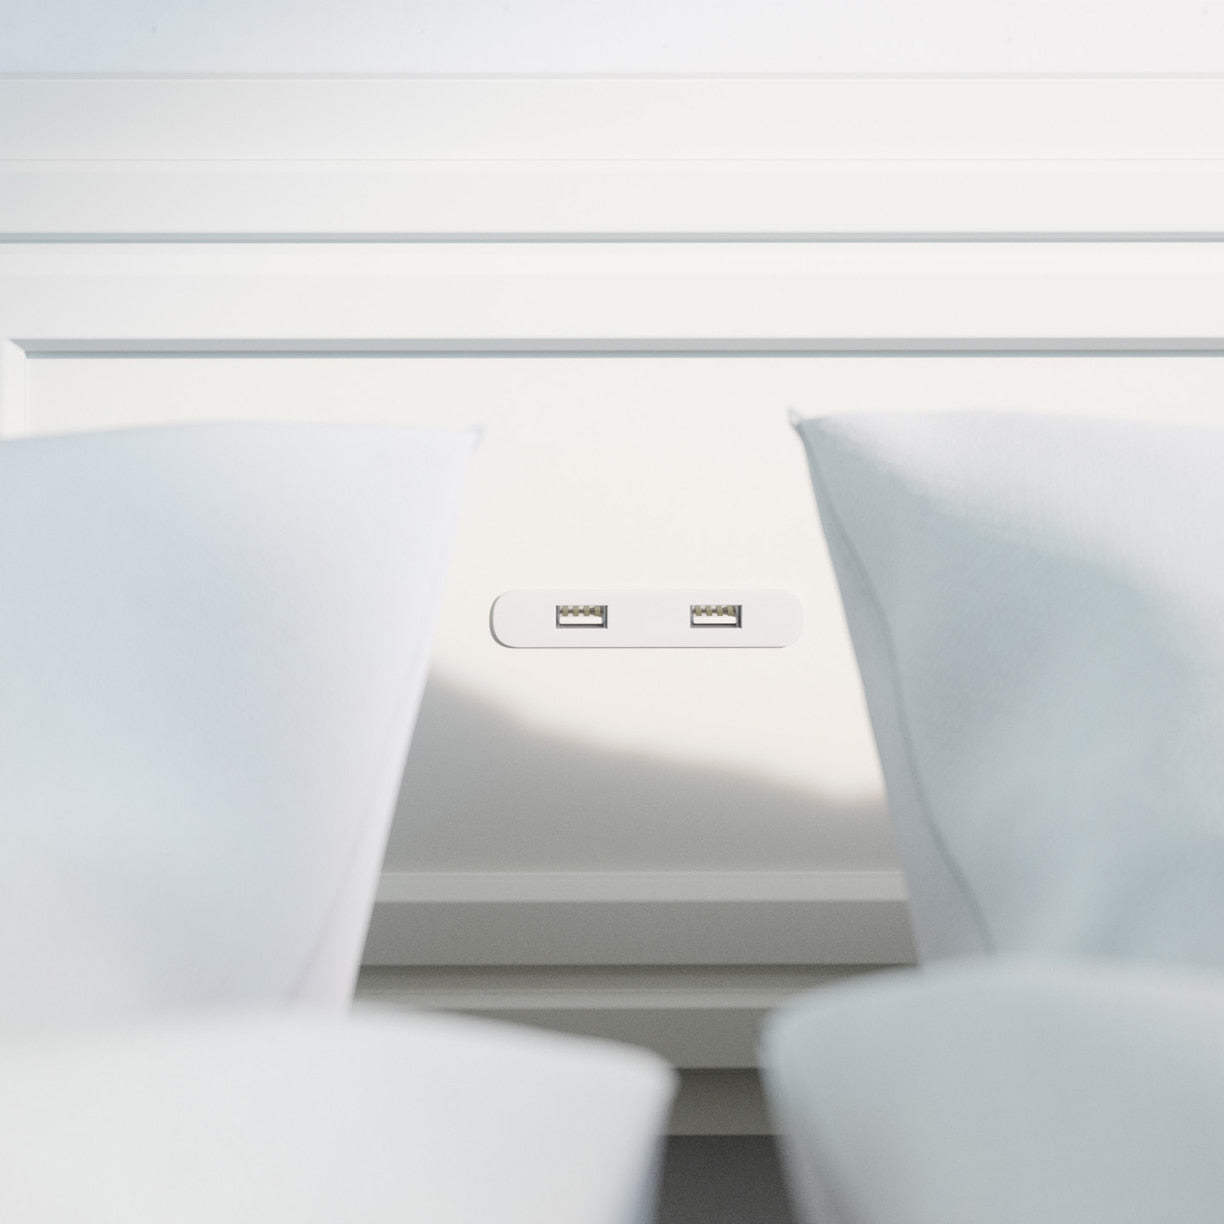 closeup of the 2 usb ports aegis queen murphy bed with desk bulit in headboard hidden bed hide away hide-a-way pull out fold down diy murphy bed kit wall bed cabinet